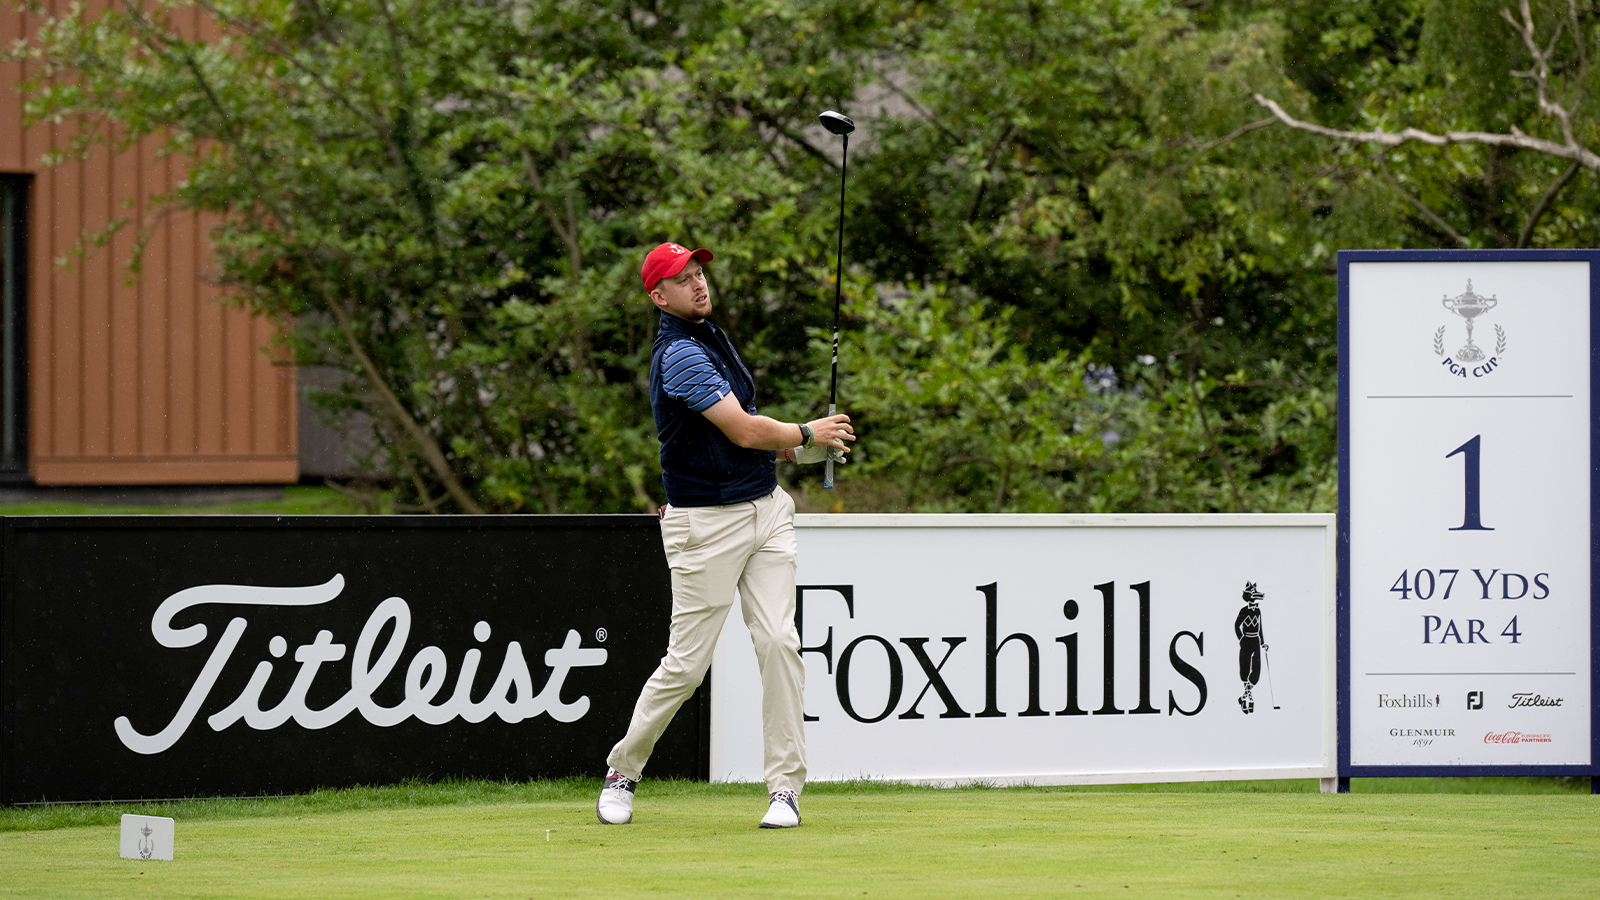 Larkin Gross of the United States hits his shot during the 30th PGA Cup at Foxhills Golf Club on September 13, 2022 in Ottershaw, England.  (Photo by Matthew Harris/PGA of America)